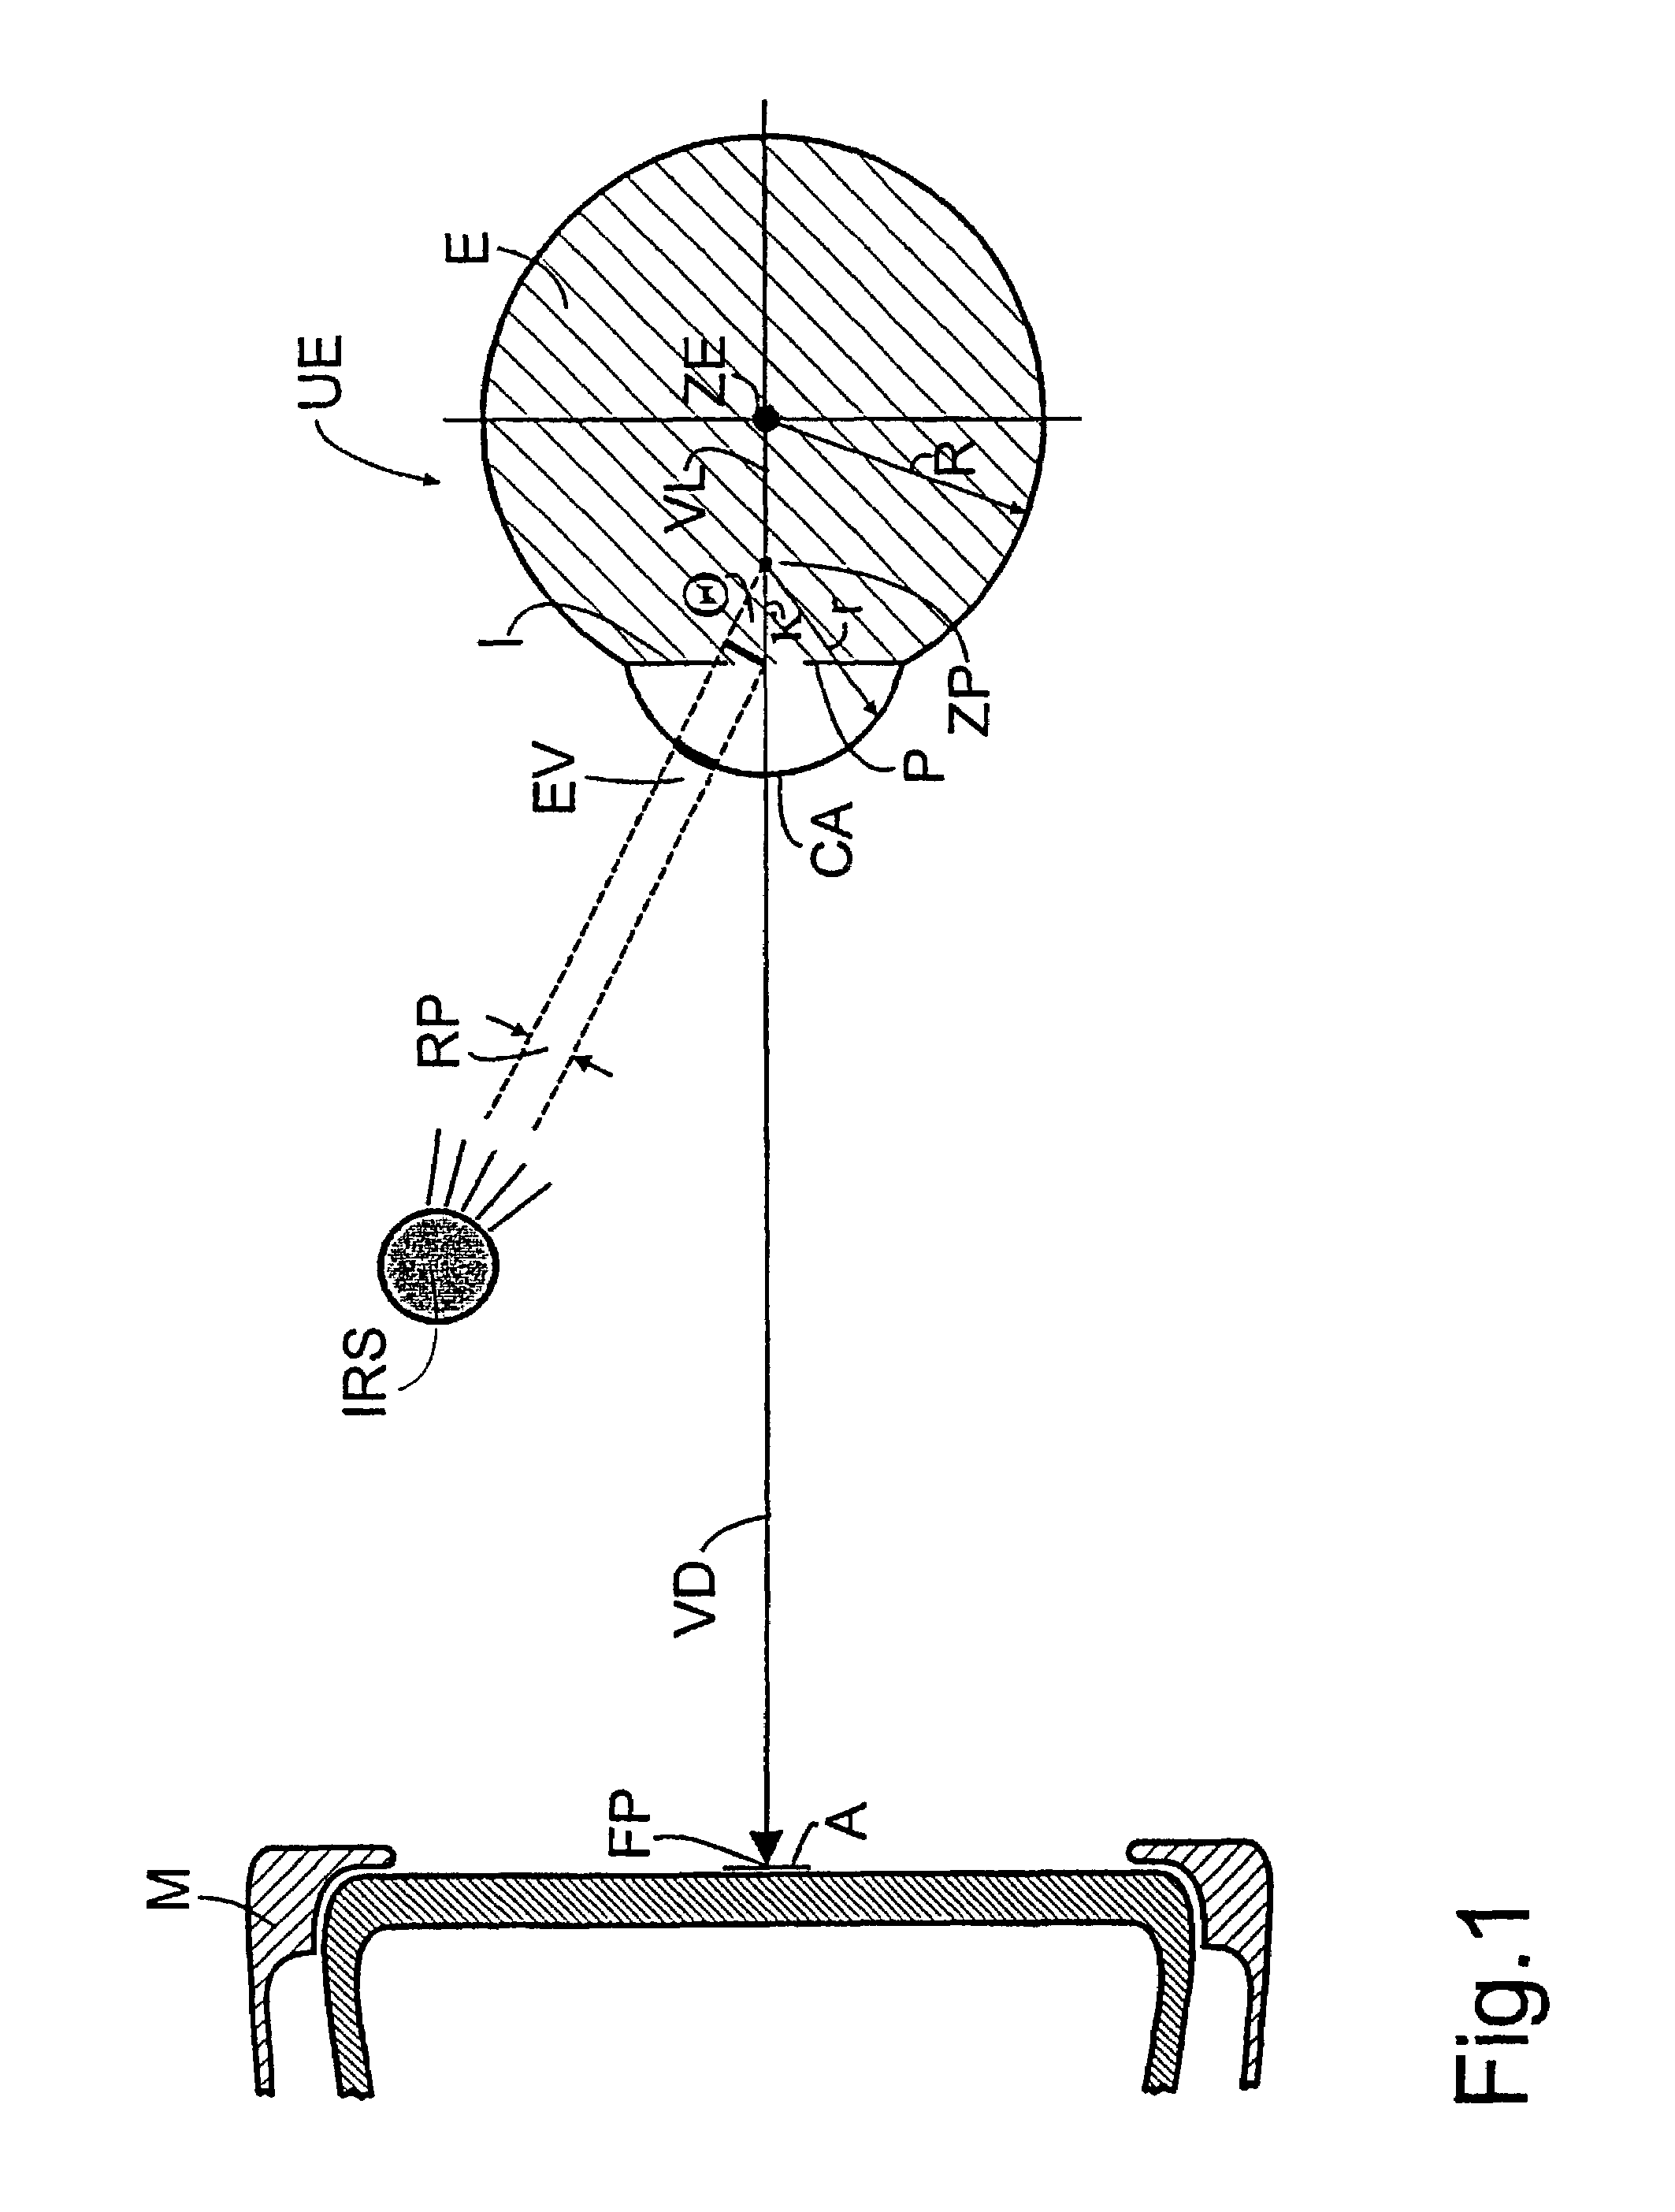 Method and apparatus for computer-aided determination of viewer's gaze direction